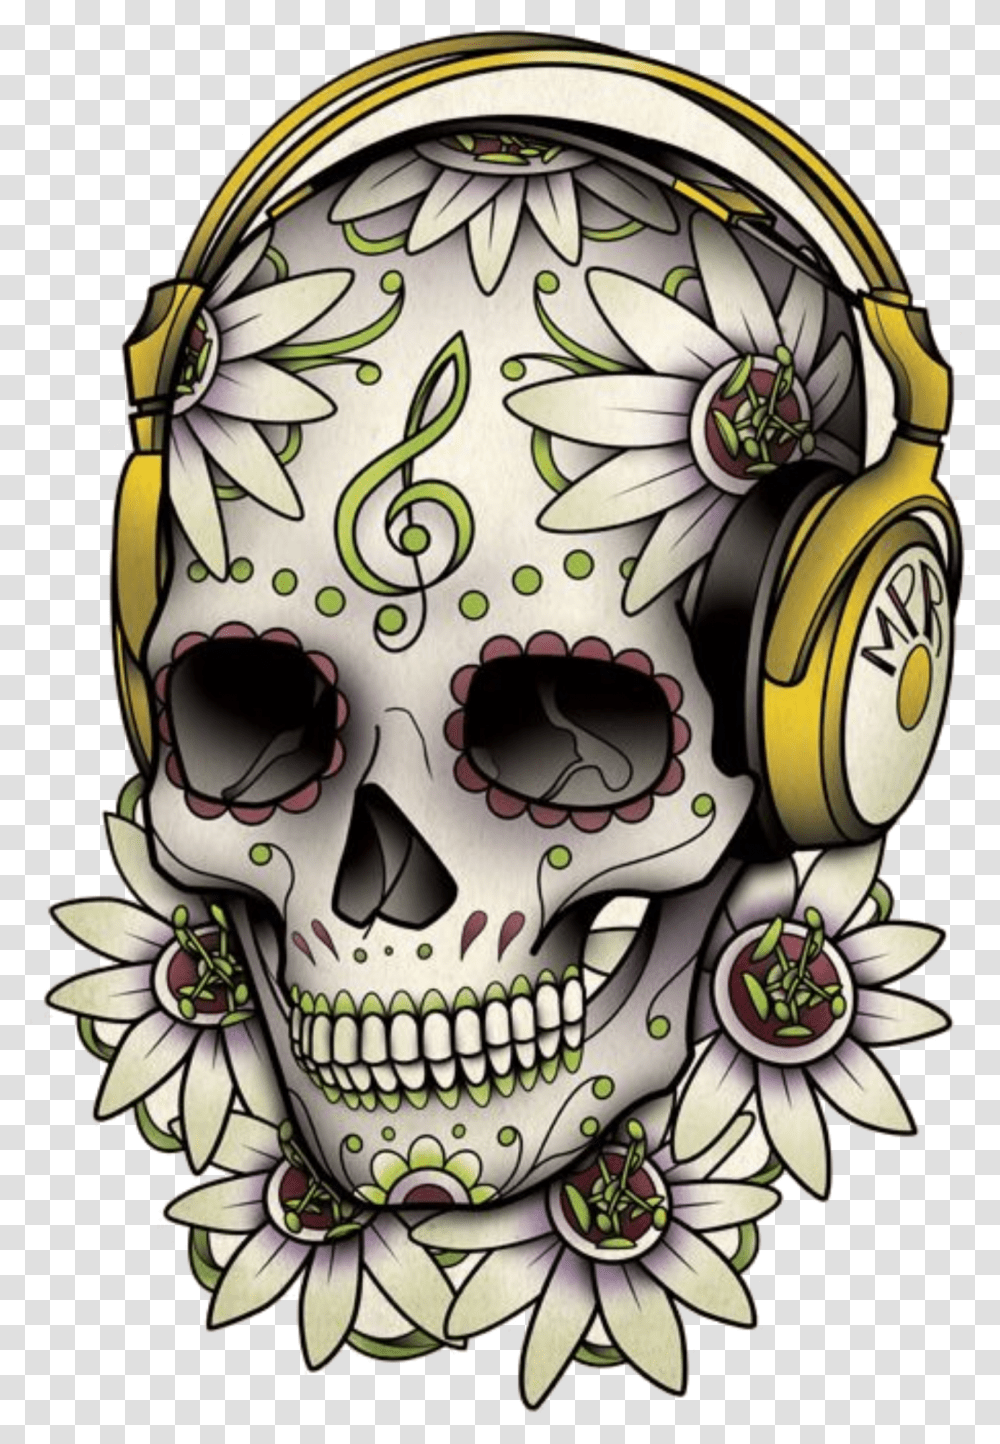 Tattoo Skull Calavera Dead Drawing Of The Clipart Day Of The Dead Skull Music, Head, Sunglasses, Doodle Transparent Png